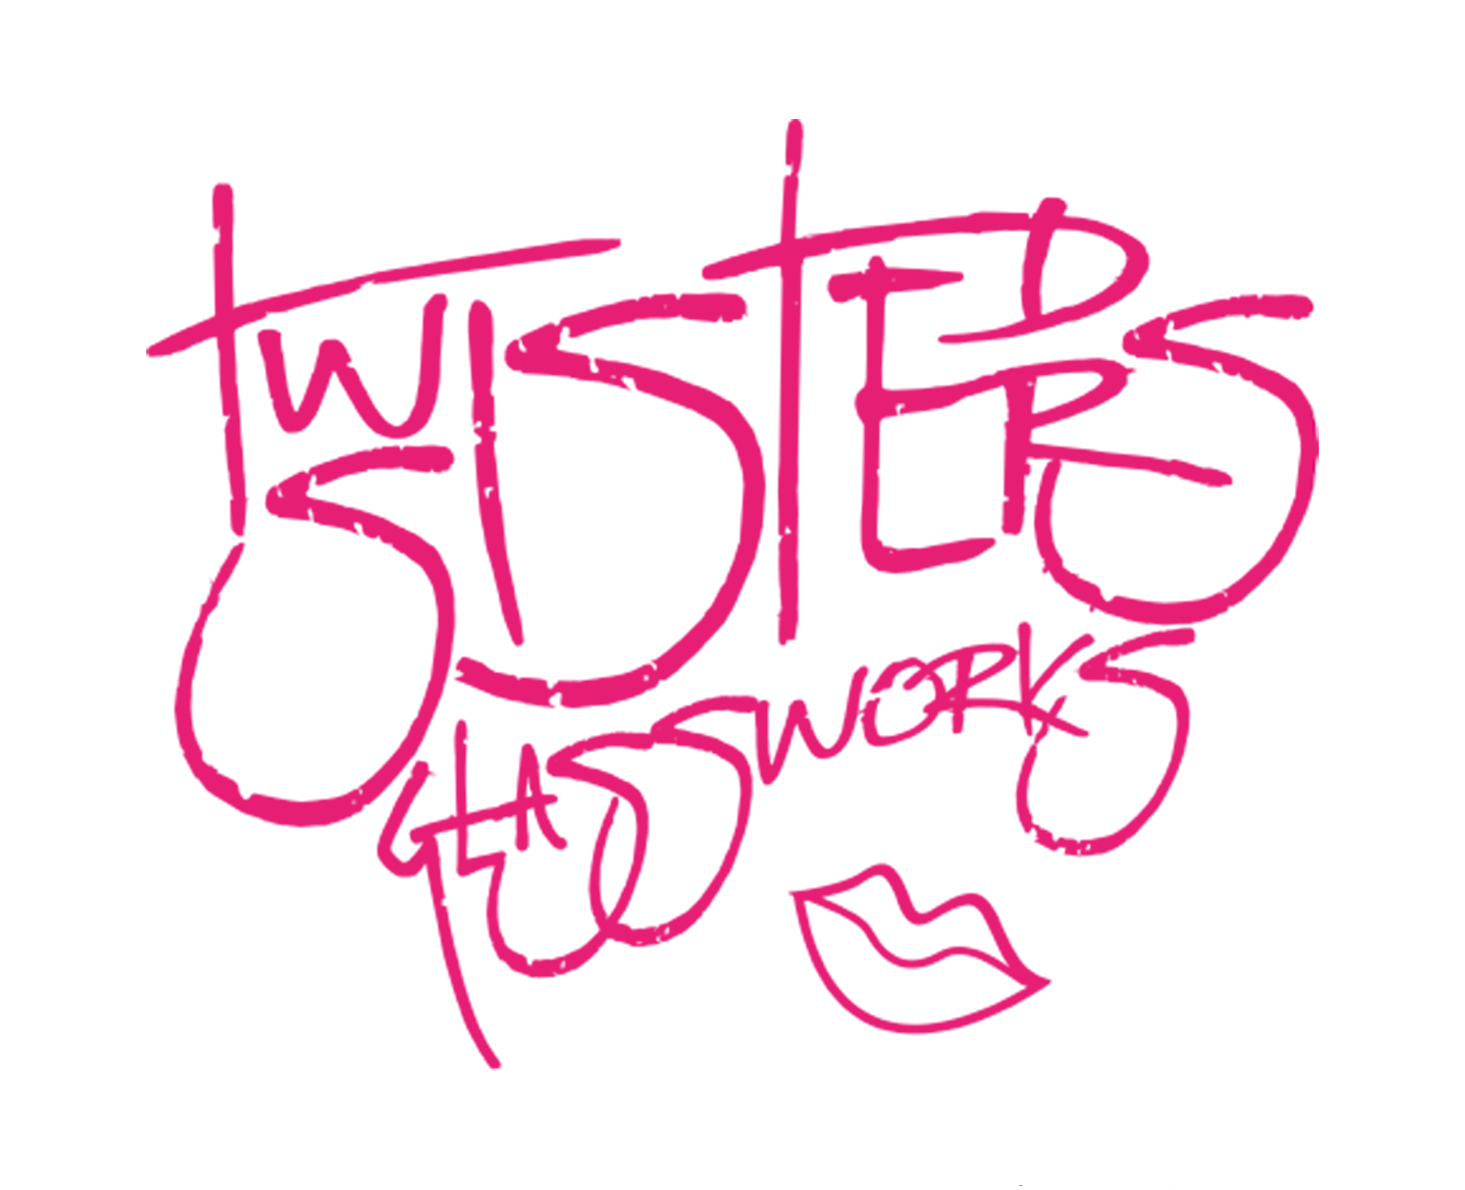 A pink graffiti type logo with the word 